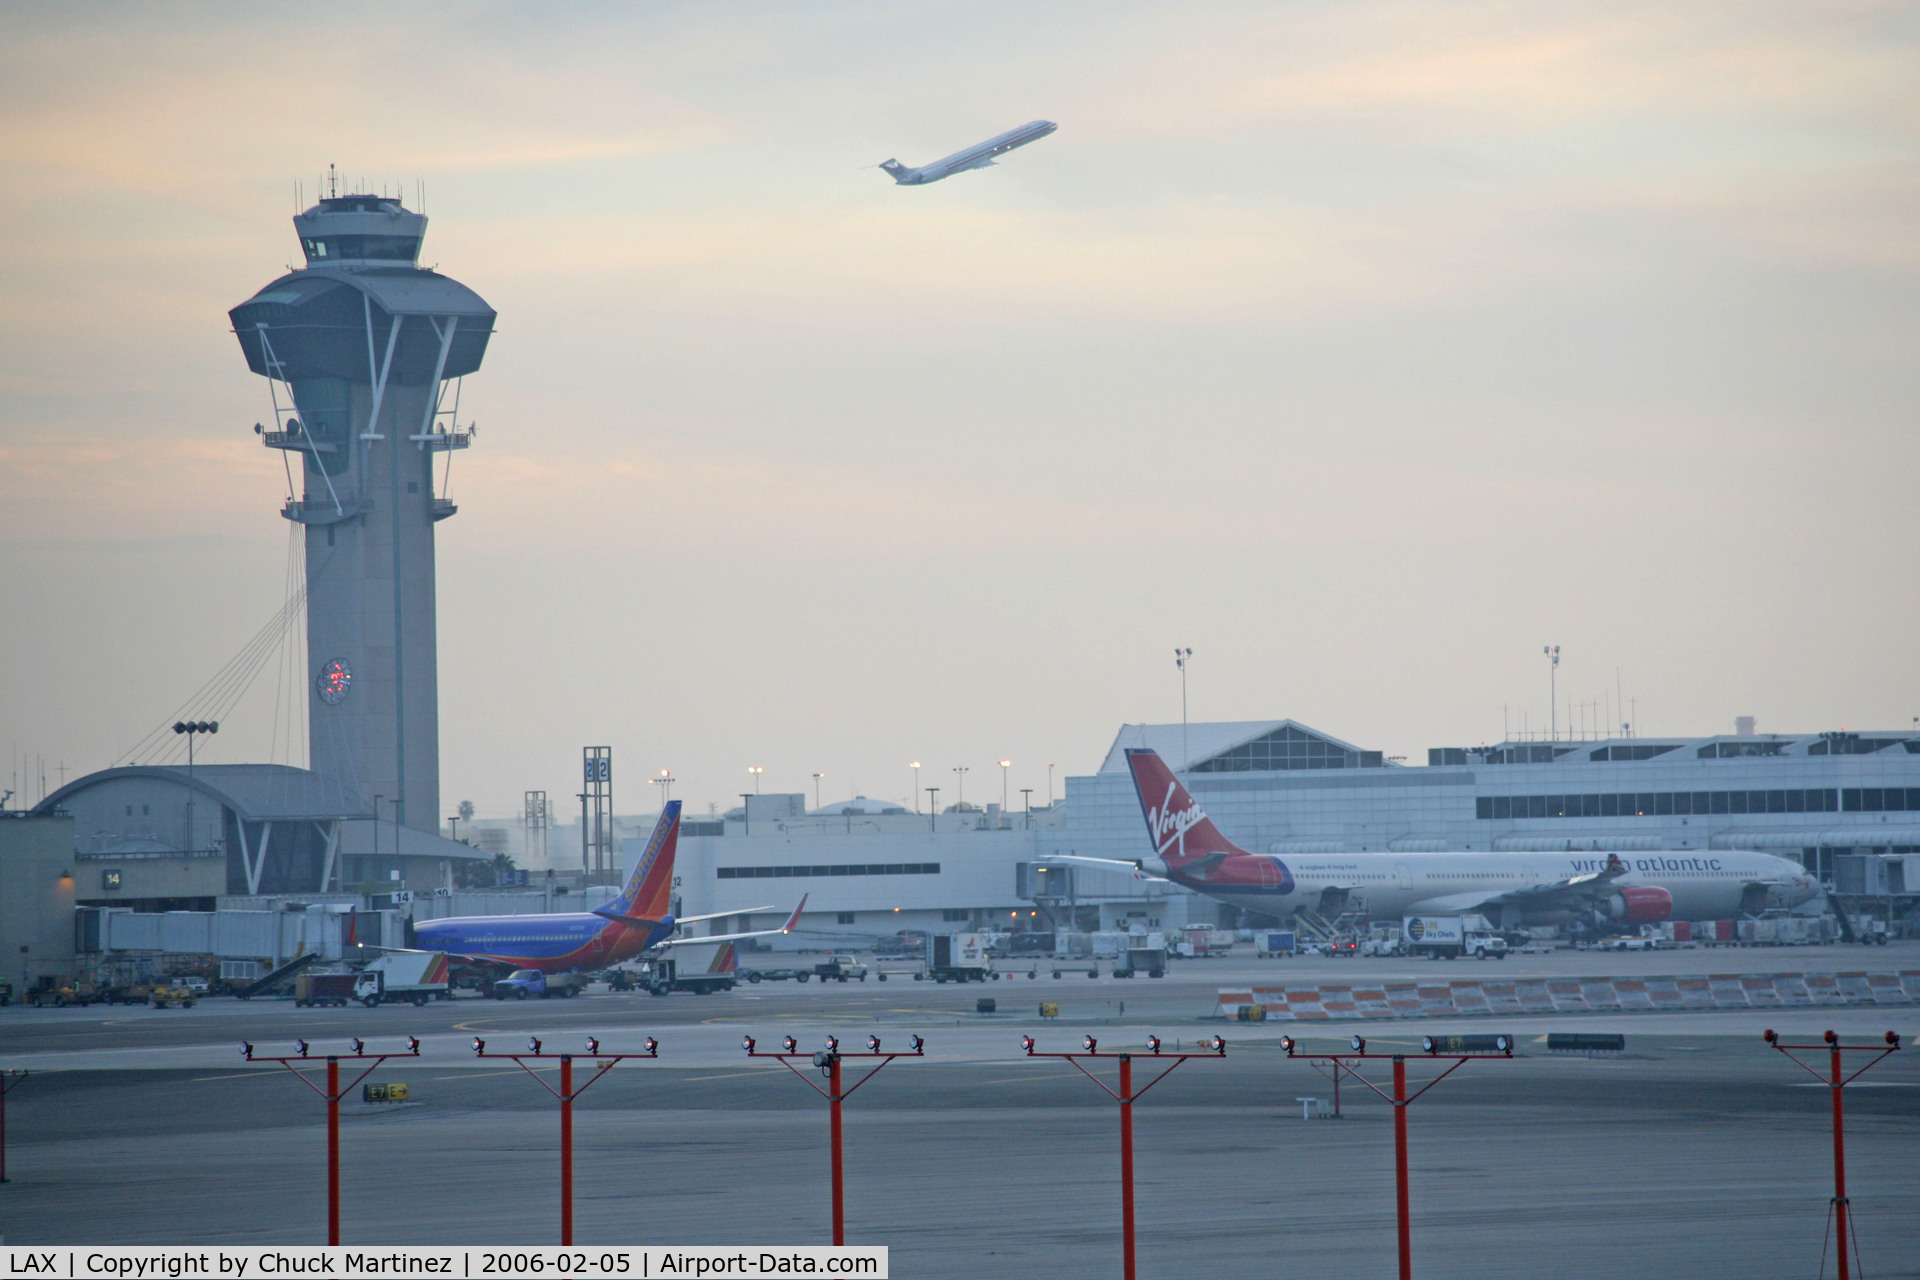 Los Angeles International Airport (LAX) - Tower, Southwest and Virgin planes